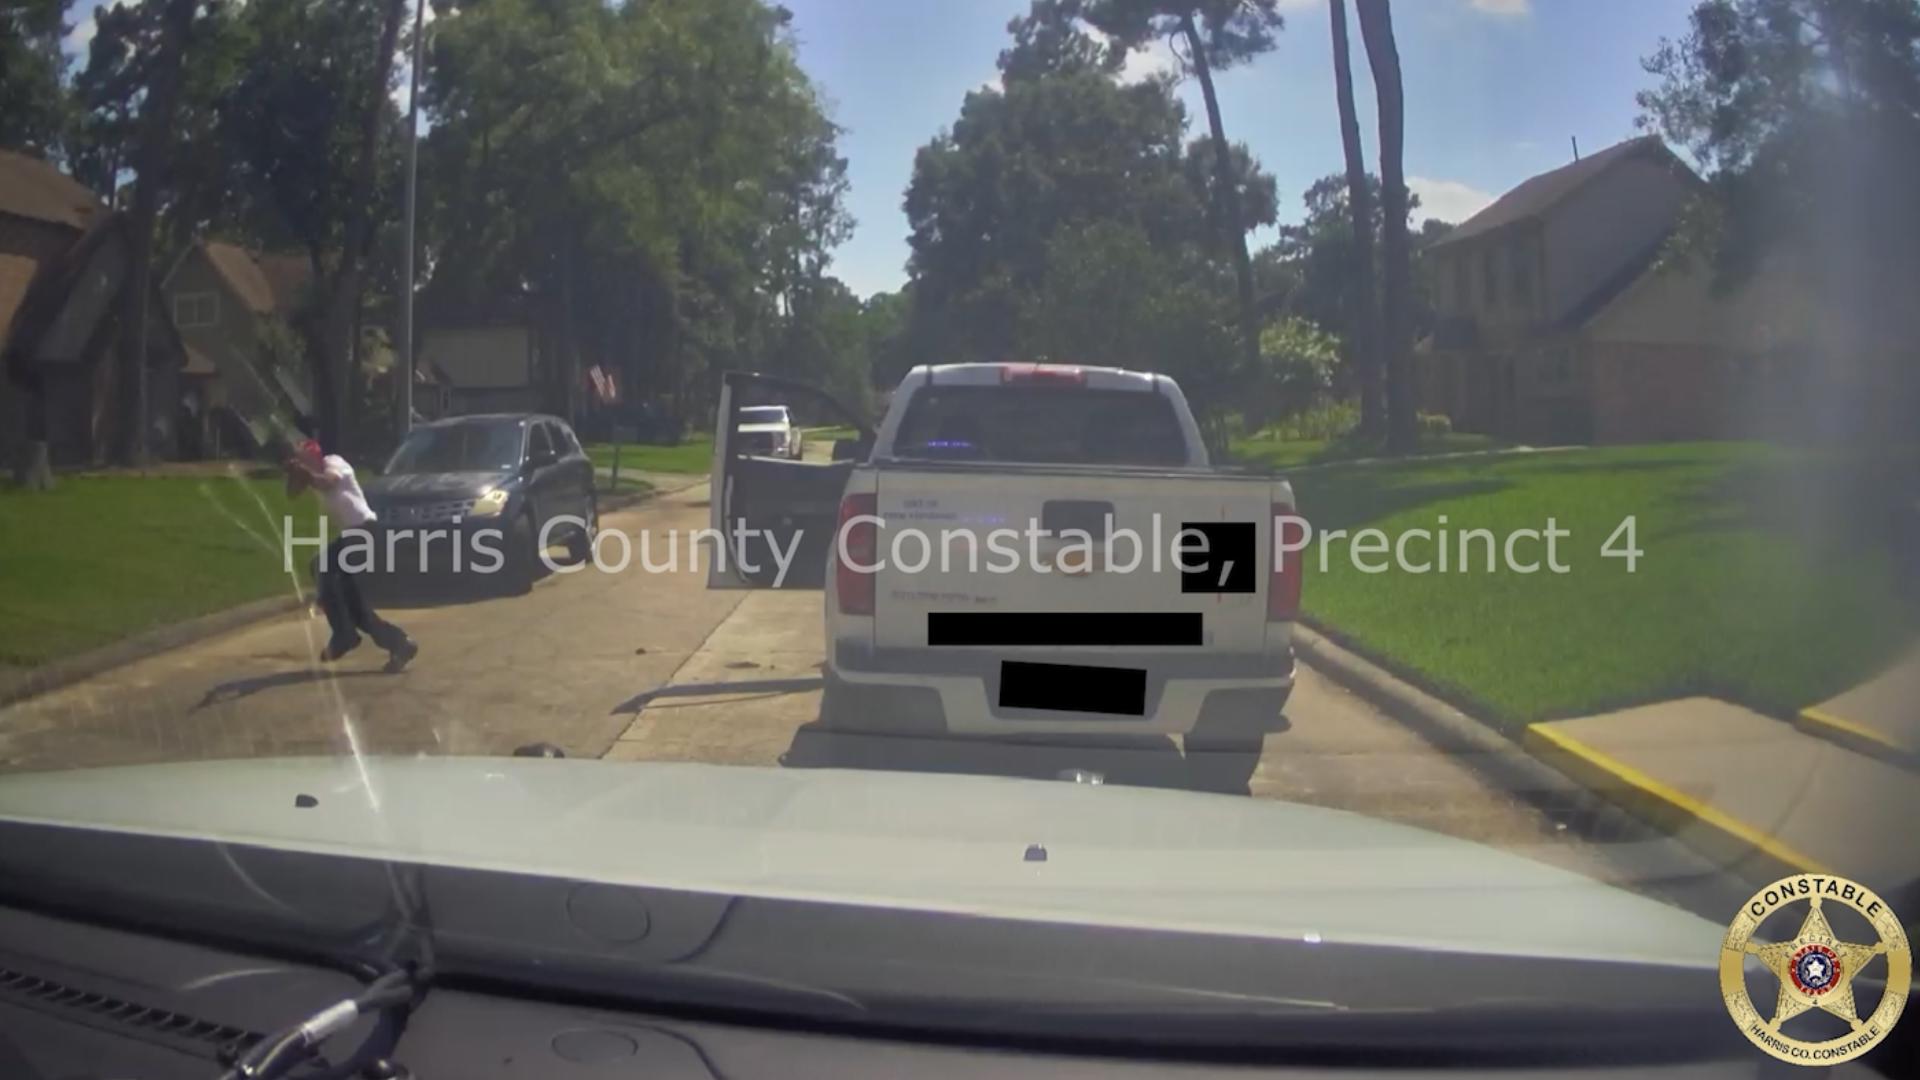 The Harris County Precinct 4 Constable's Office released a short video showing part of a shootout at the end of a chase in the Klein area.